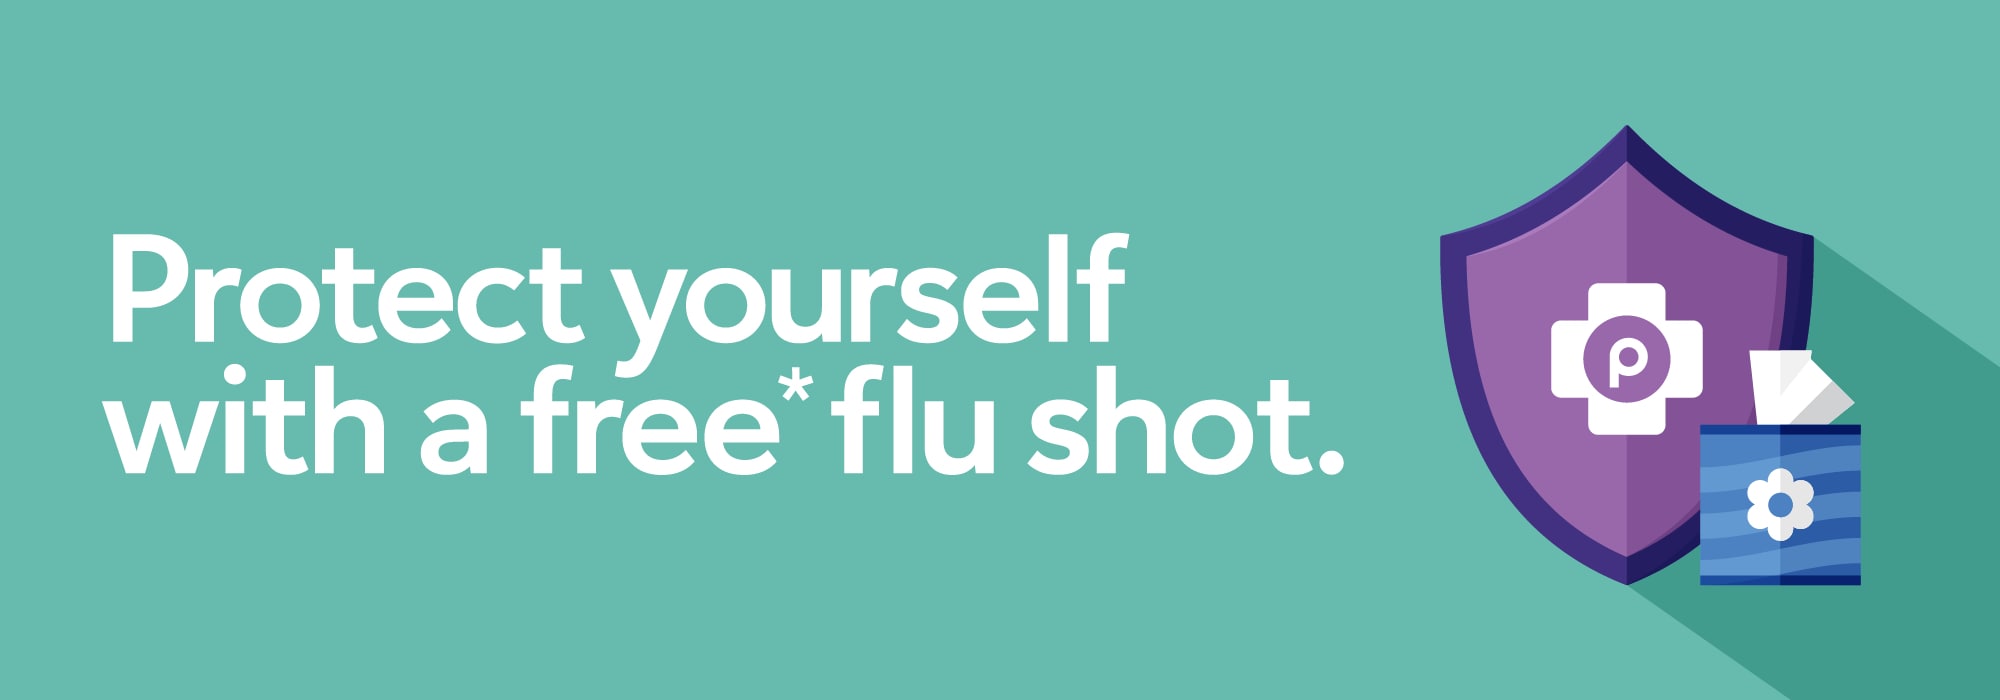 Protect yourself with a free* flu shot.